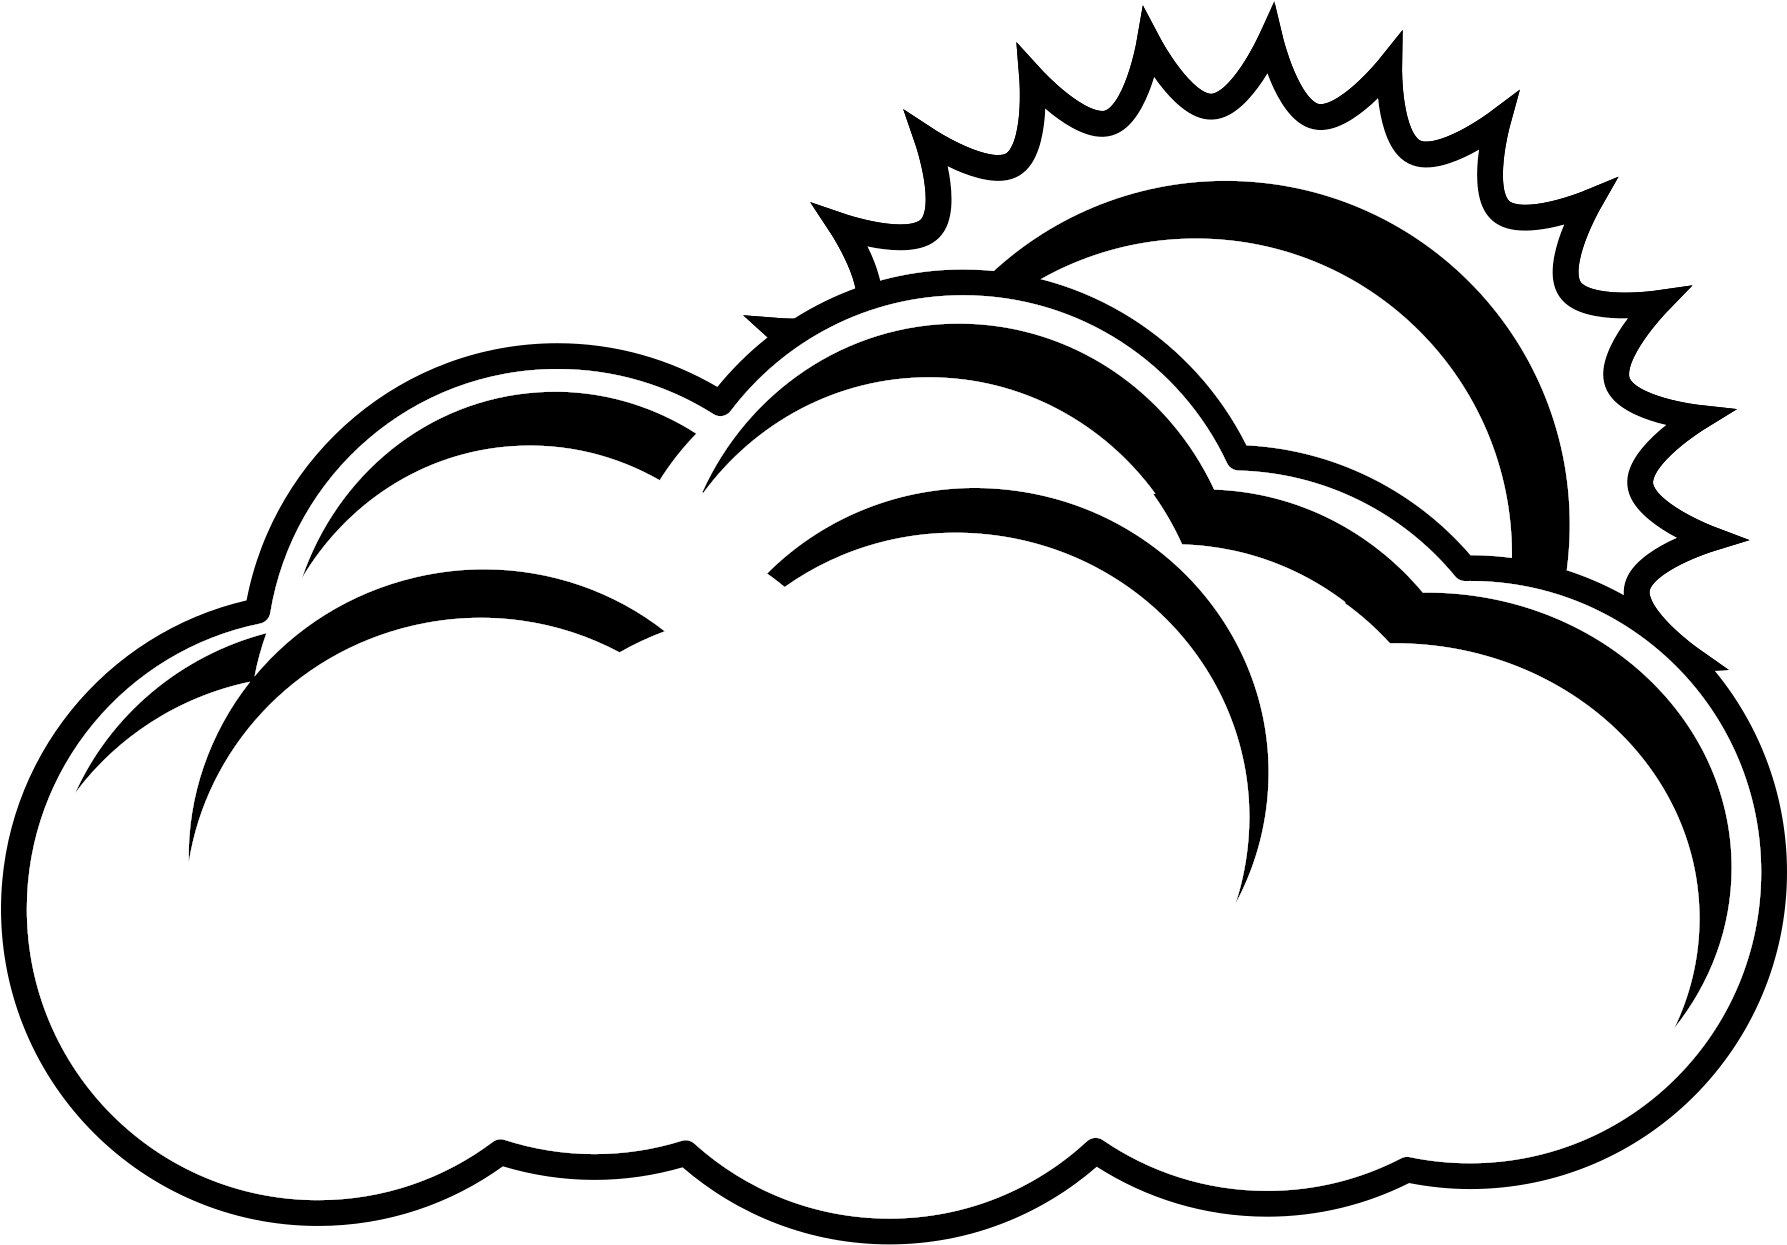 In Back And White - Sun Clouds Black And White - (2400x3394) Png Clipart .....